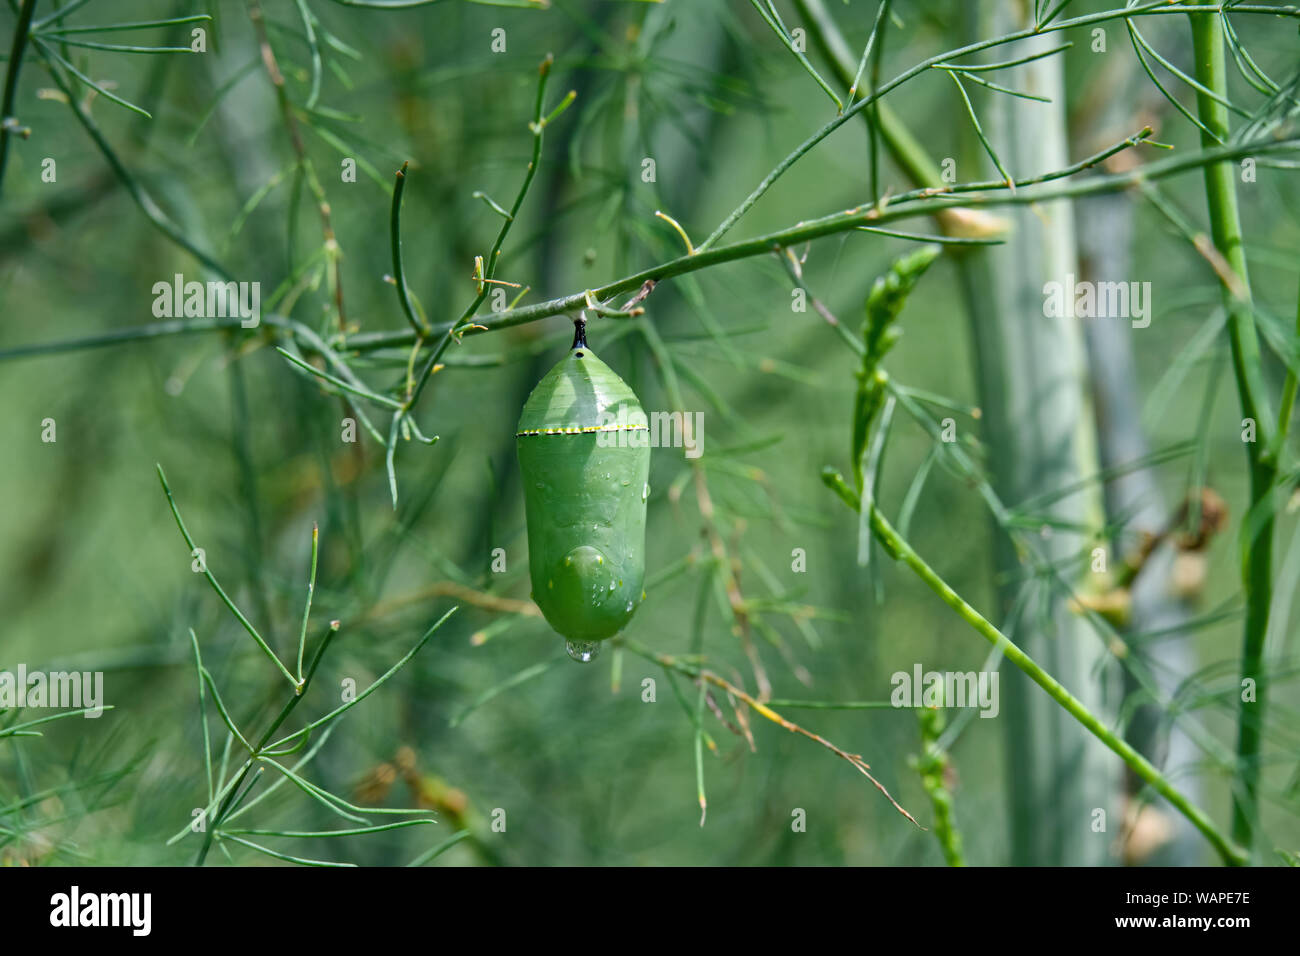 Monarch butterfly chrysalis on asparagus greenery. It is a milkweed butterfly in the family Nymphalidae. Stock Photo